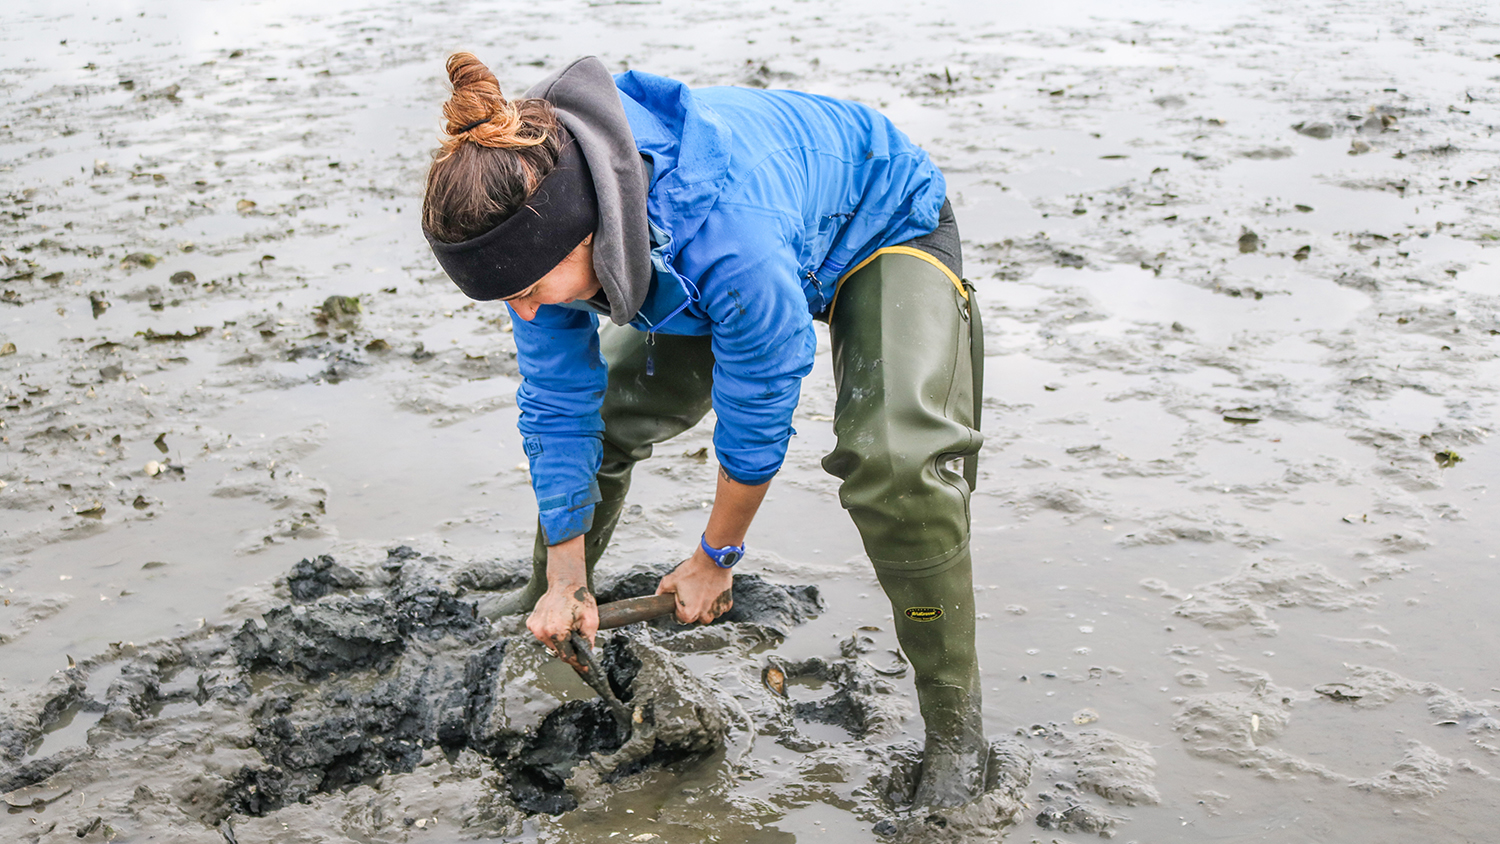 Kara Pellowe digging for softshell clams in June 2019 as part of her doctoral research in Newcastle, Maine.